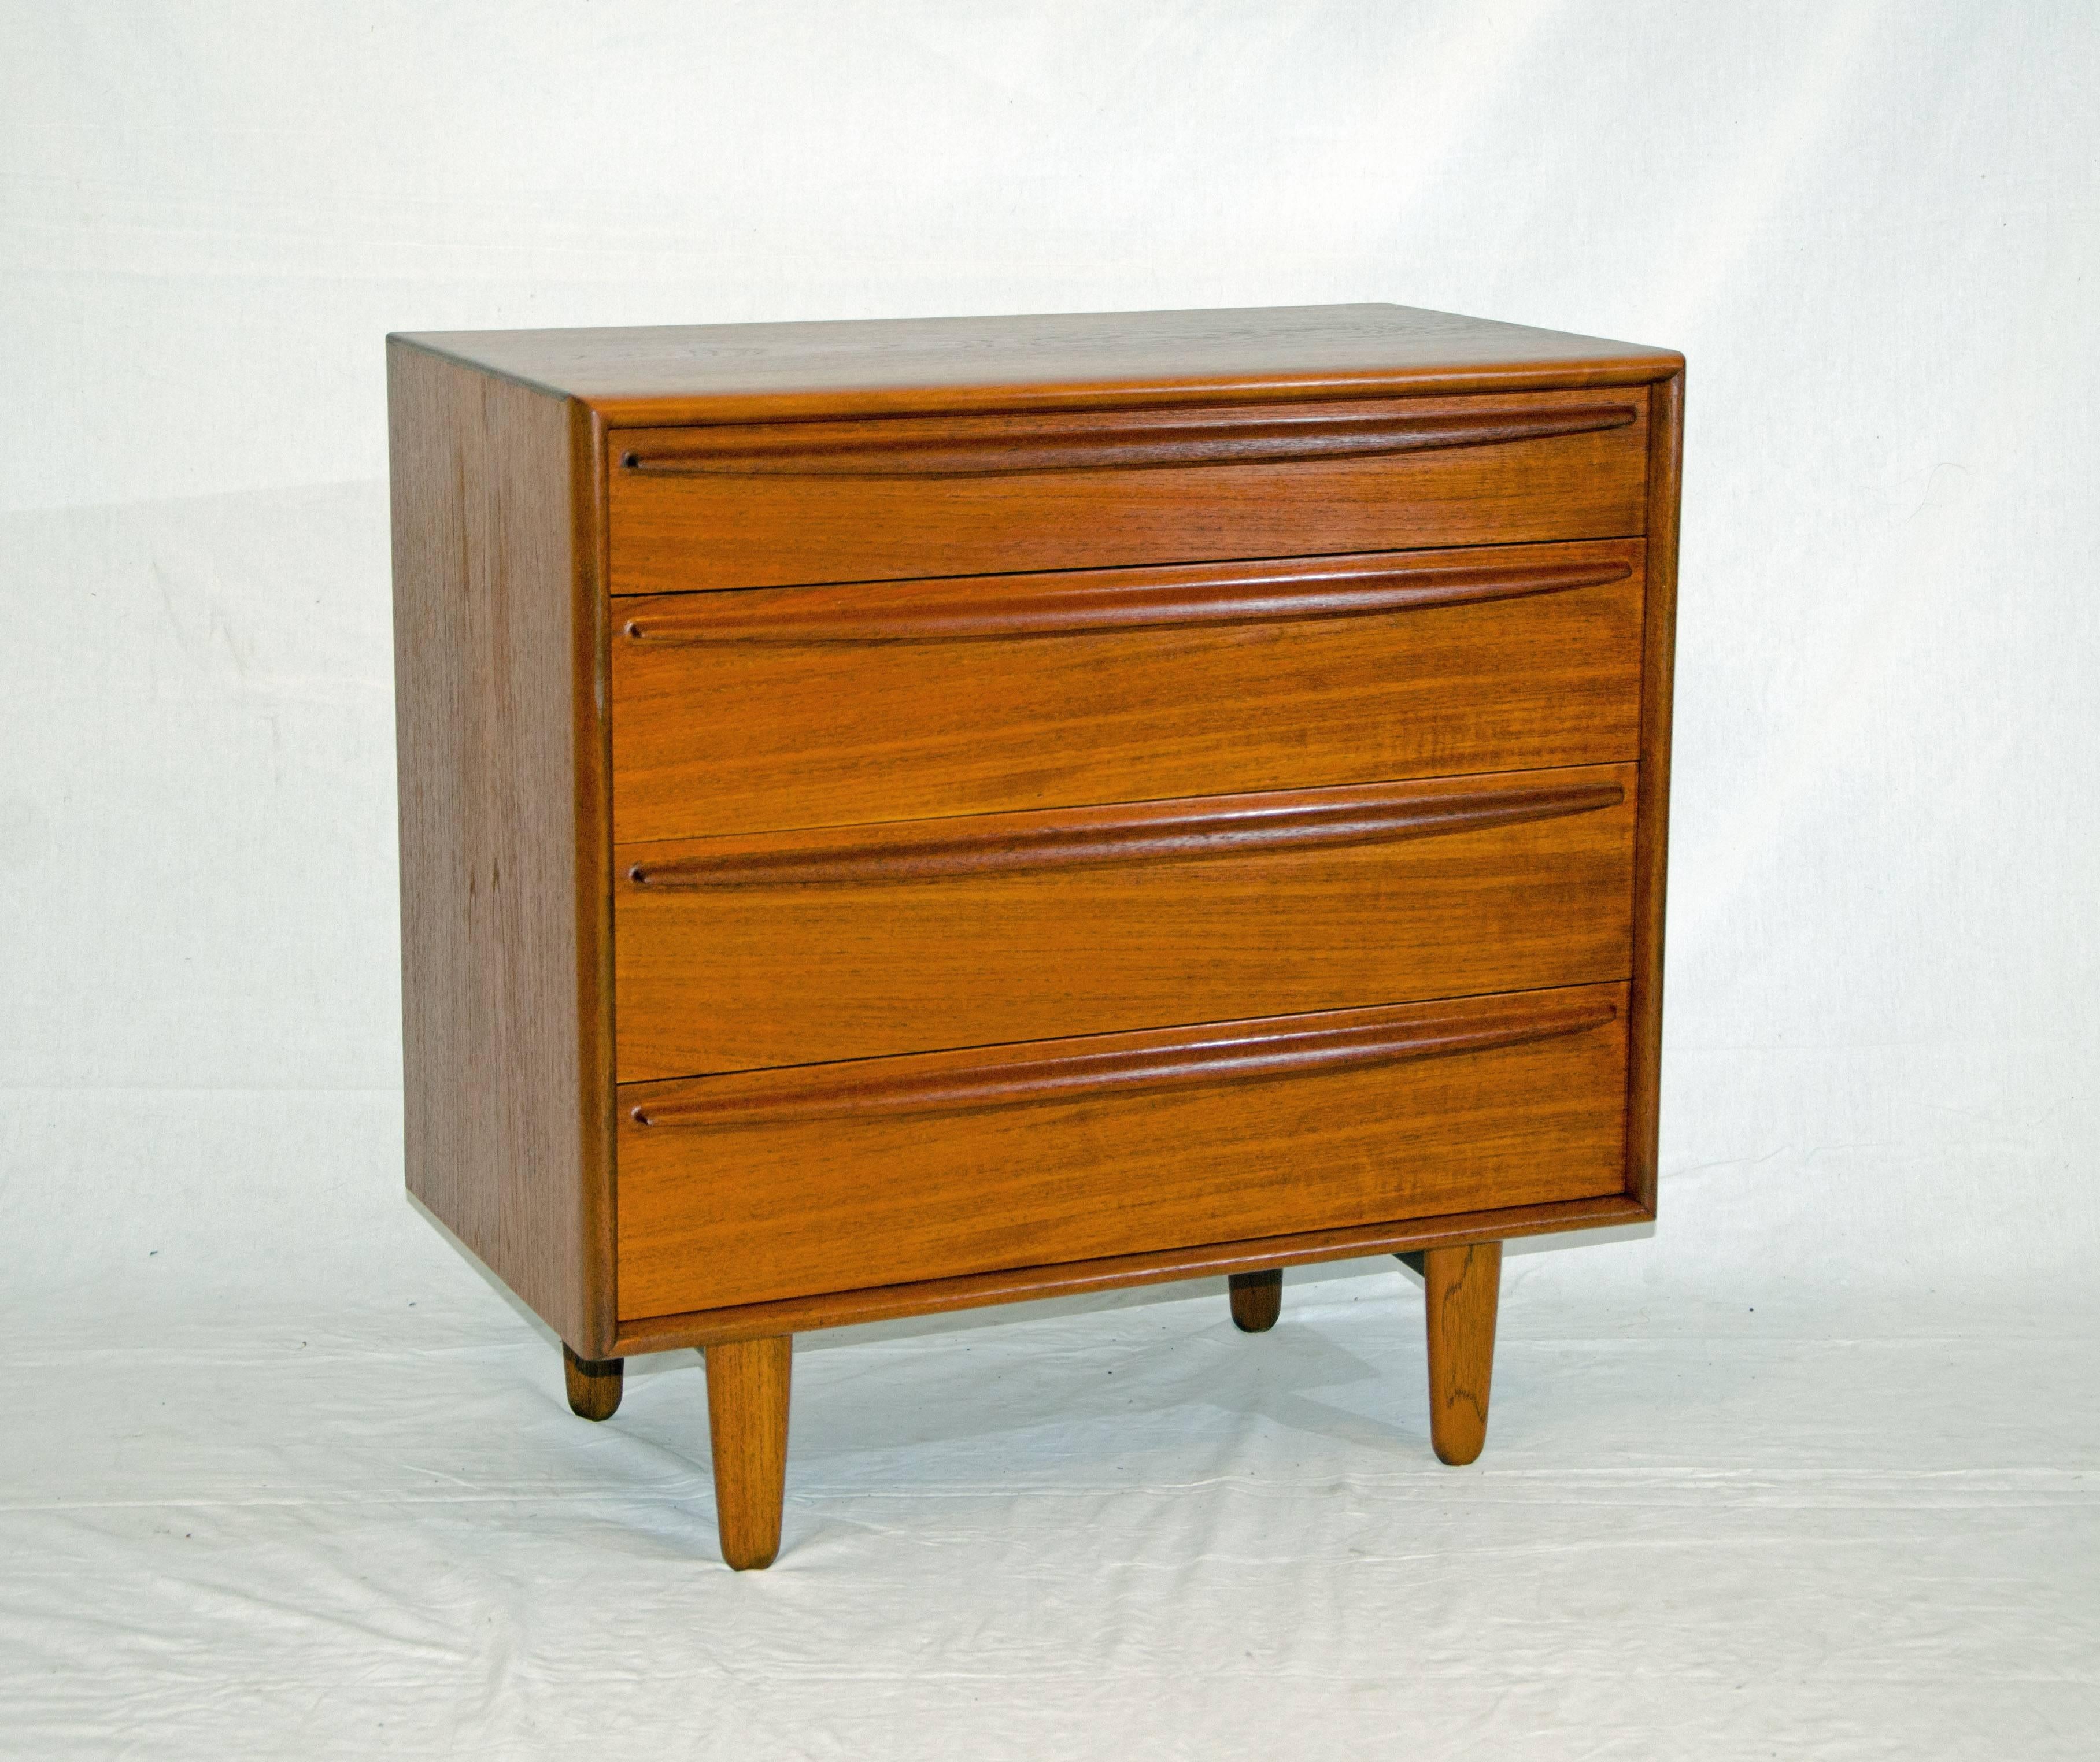 Nice small four-drawer teak chest perfect for a child's room or hallway. It is a well made small dresser with mahogany drawer bottoms and sides. The top drawer is 3 1/2